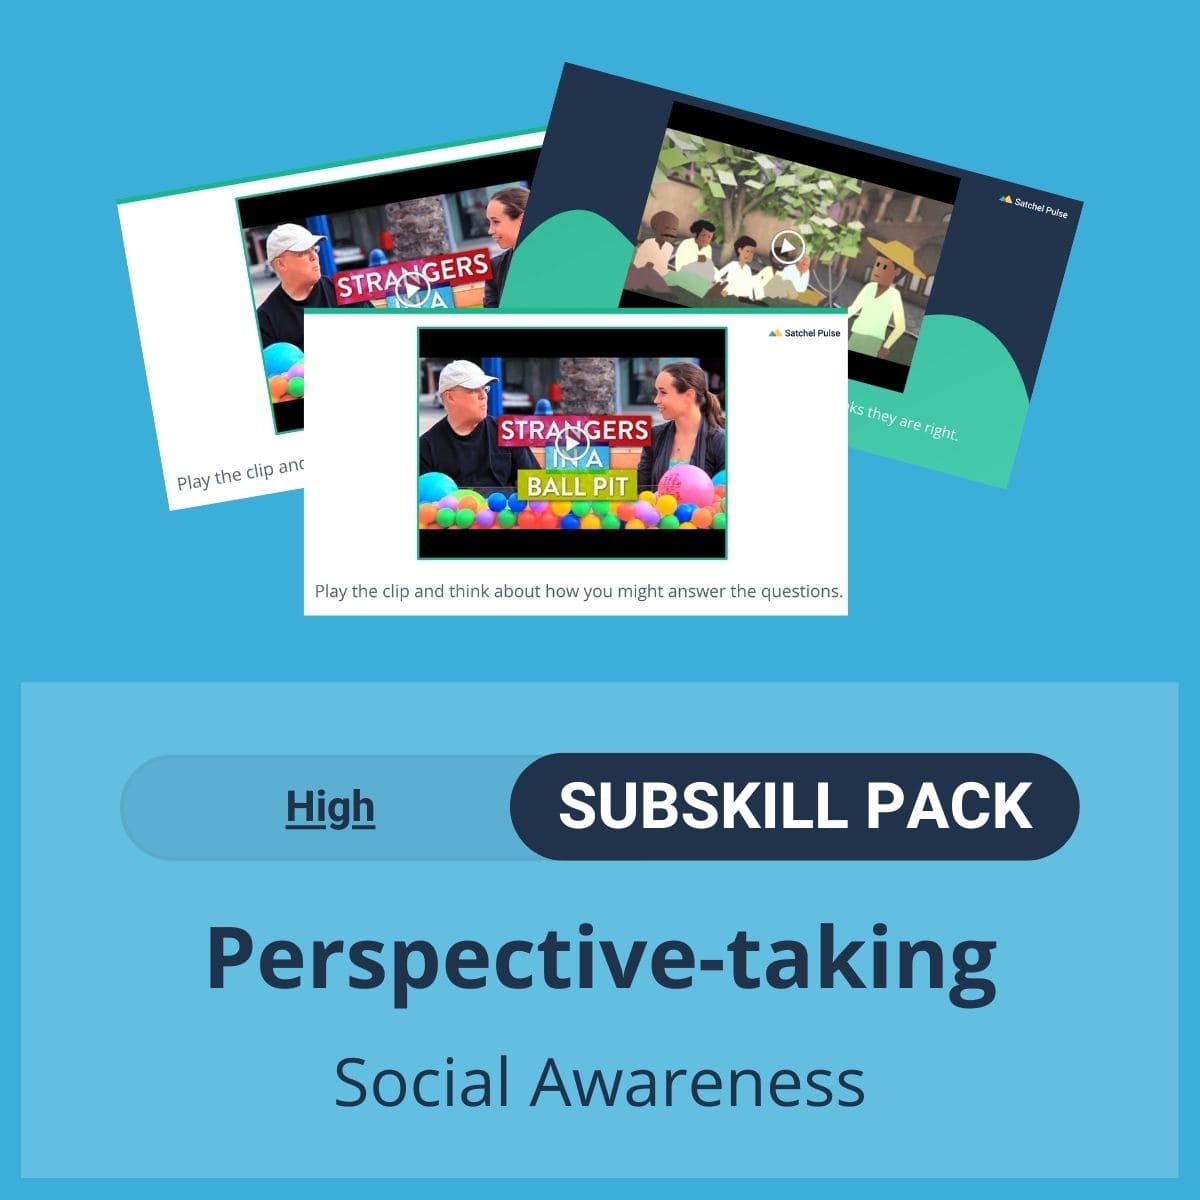 SEL Resource pack with social-emotional learning lessons and self-studies to help you teach Perspective-taking in your classroom as a part of the SEL curriculum.